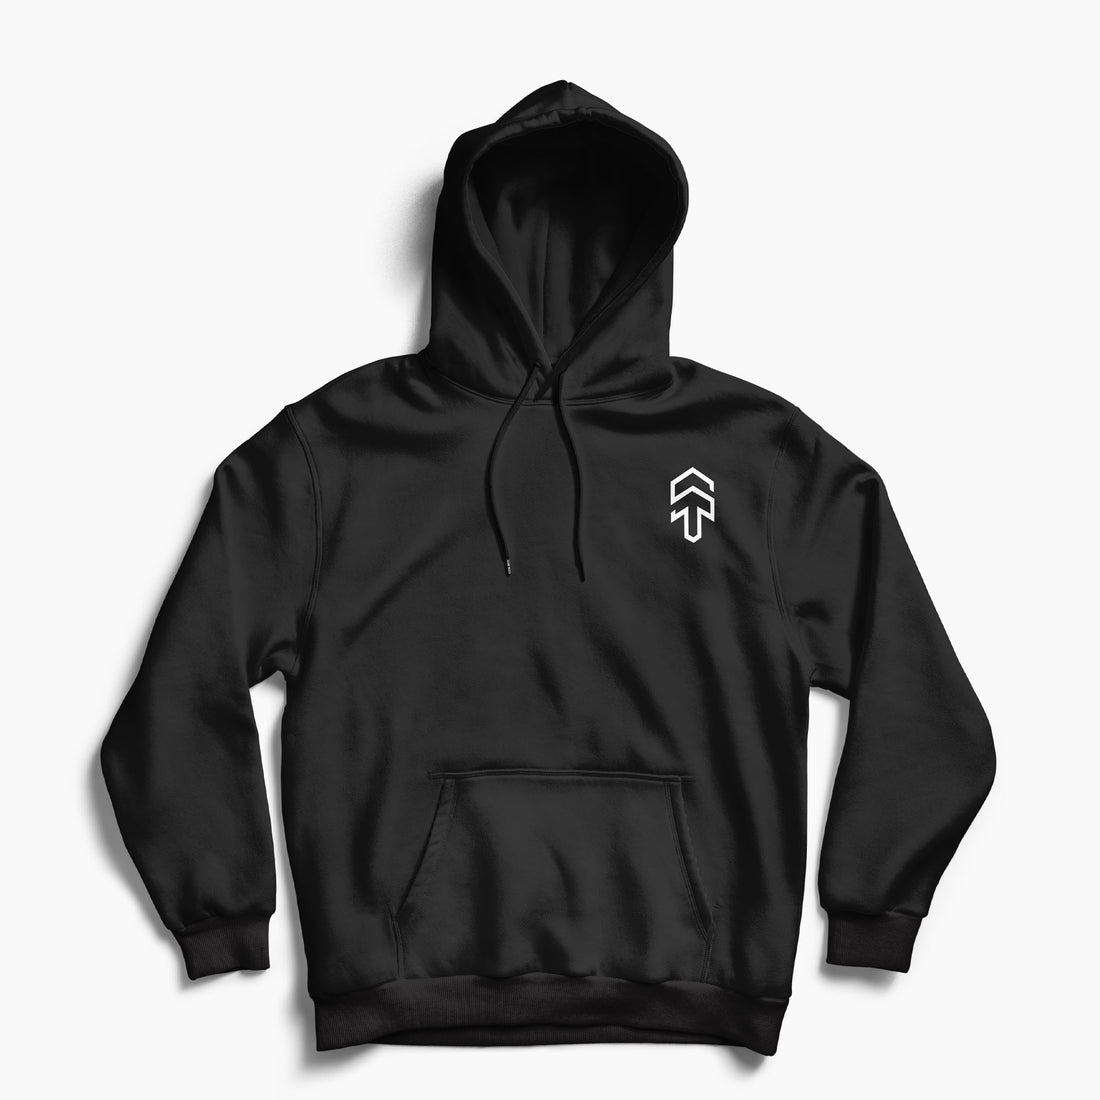 One For All Fleece Hoodie